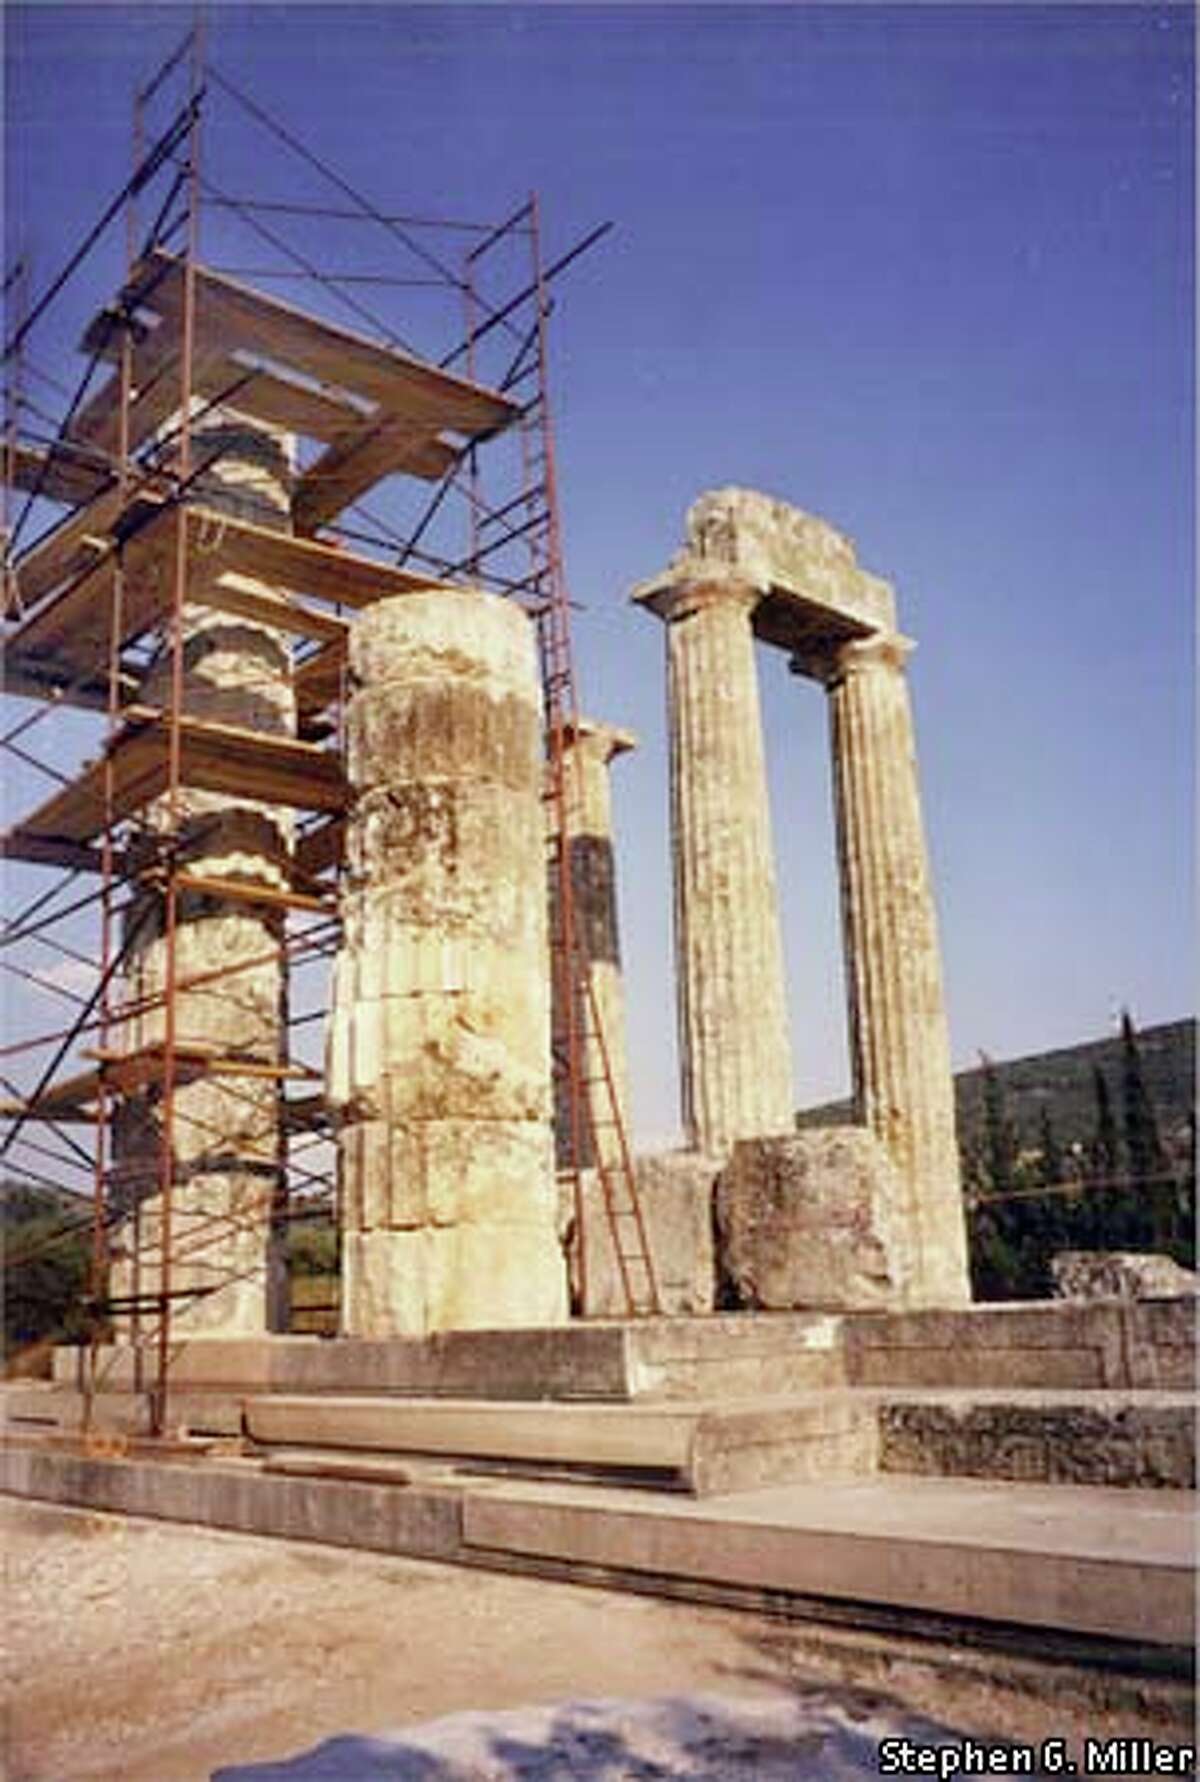 Stephen G. Miller and his archaeology crews are rebuilding one of the great limestone Doric columns that once encircled the temple of Zeus at Nemea. In front of the scaffolding stands the half-column that will be completed next summer. To the right are two of the three original columns that have stood since the time of the Nemean games. Photo courtesy of Stephen G. Miller